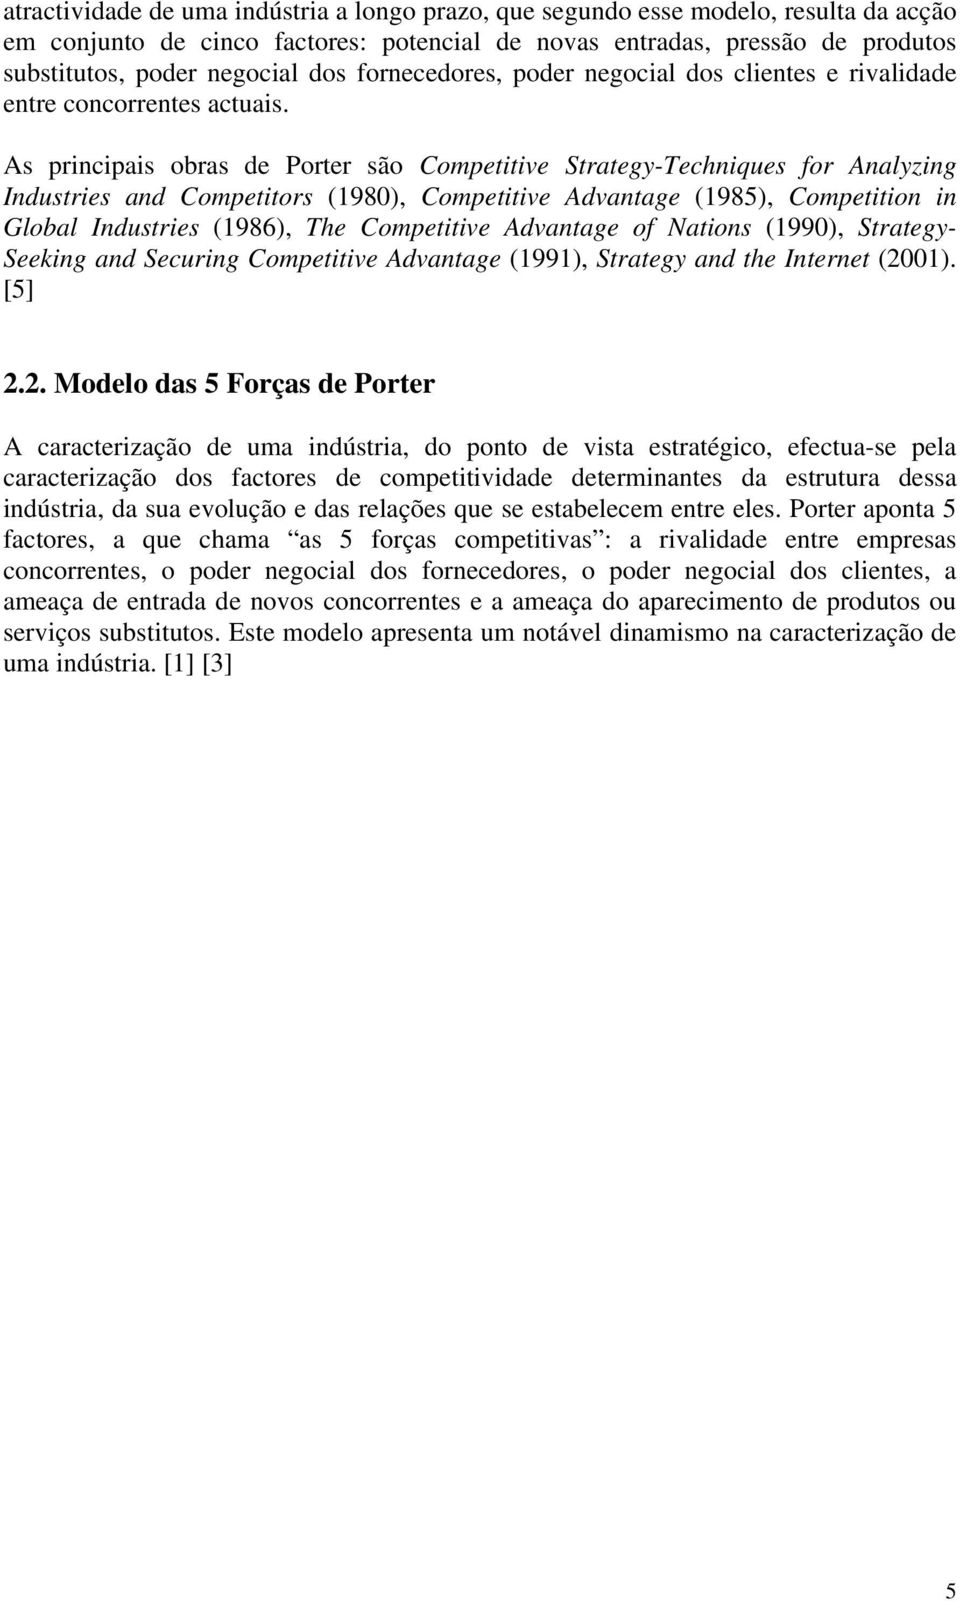 As principais obras de Porter são Competitive Strategy-Techniques for Analyzing Industries and Competitors (1980), Competitive Advantage (1985), Competition in Global Industries (1986), The